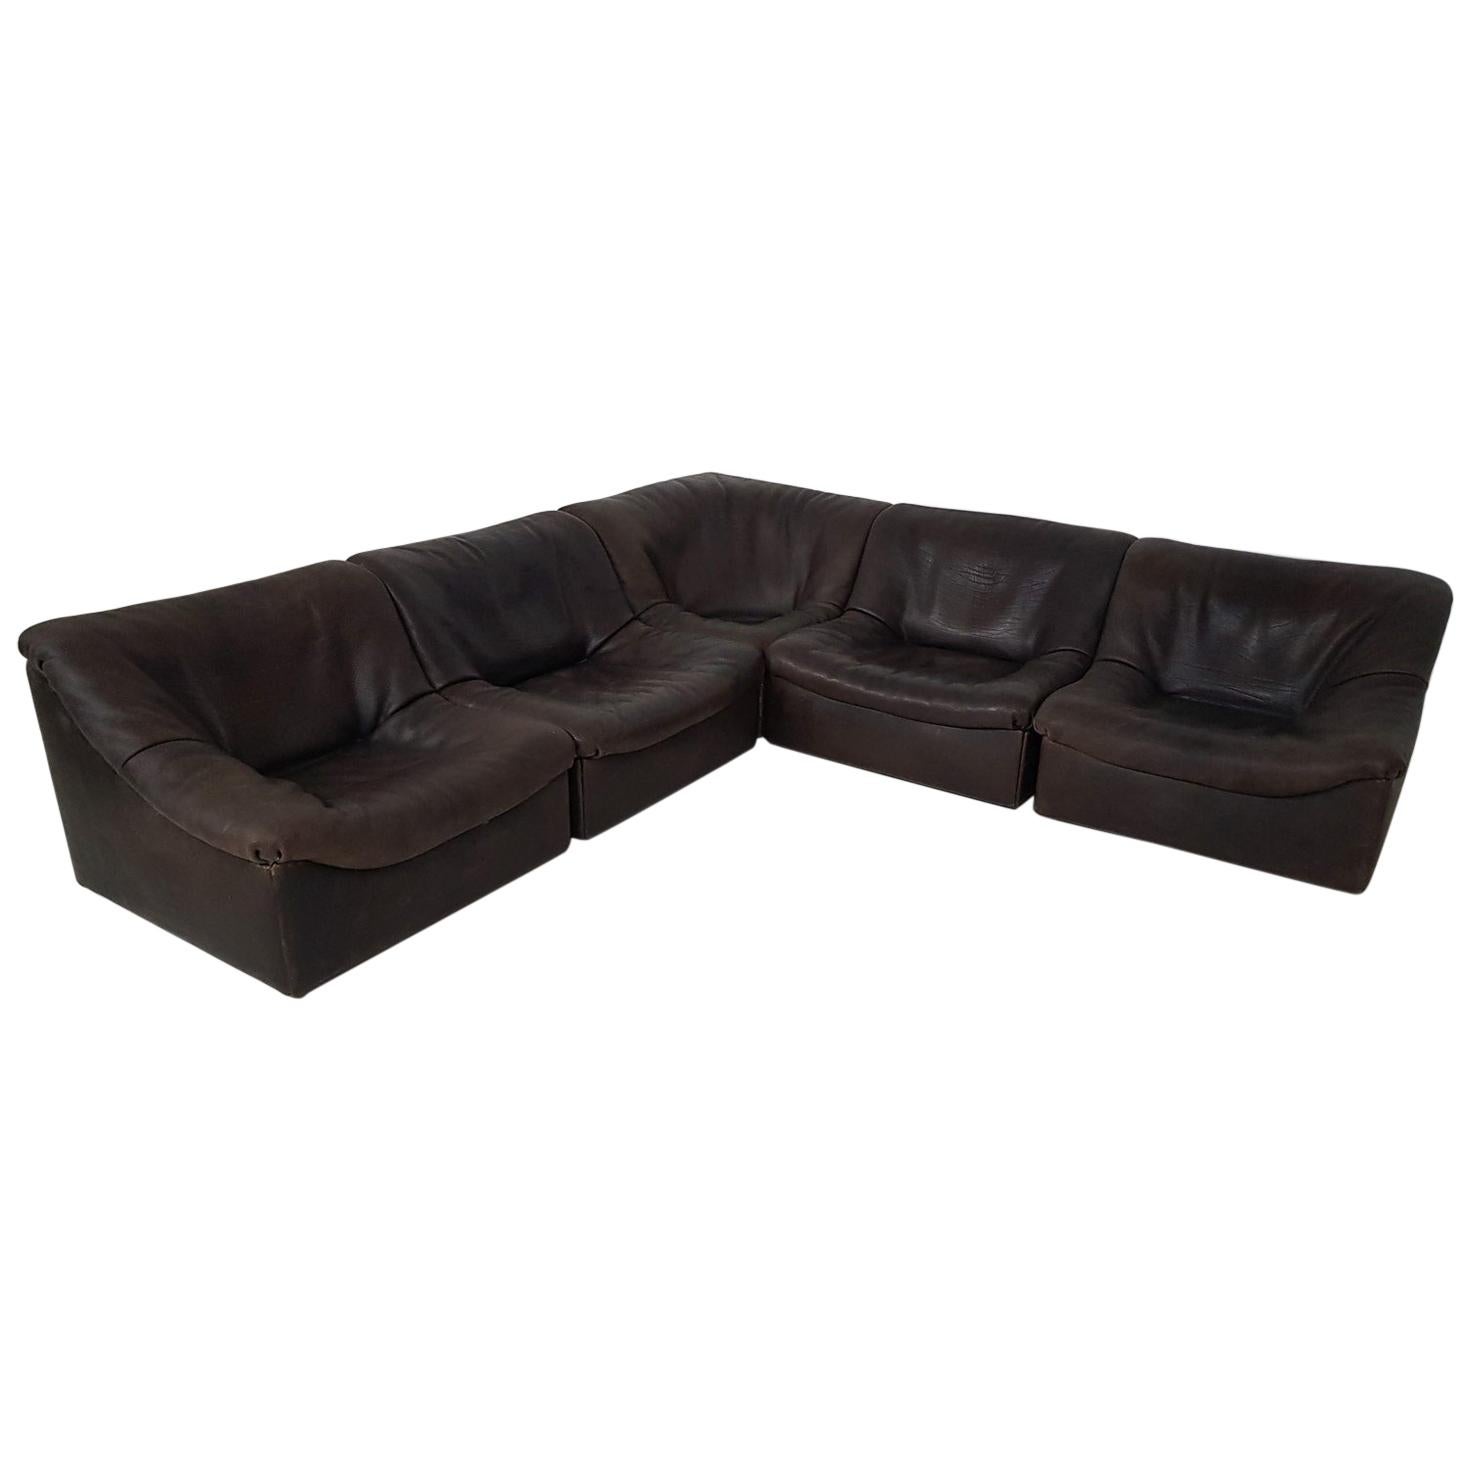 Dark Brown Neck Leather Modular or Sectional "Ds46" Sofa by De Sede, Switzerland